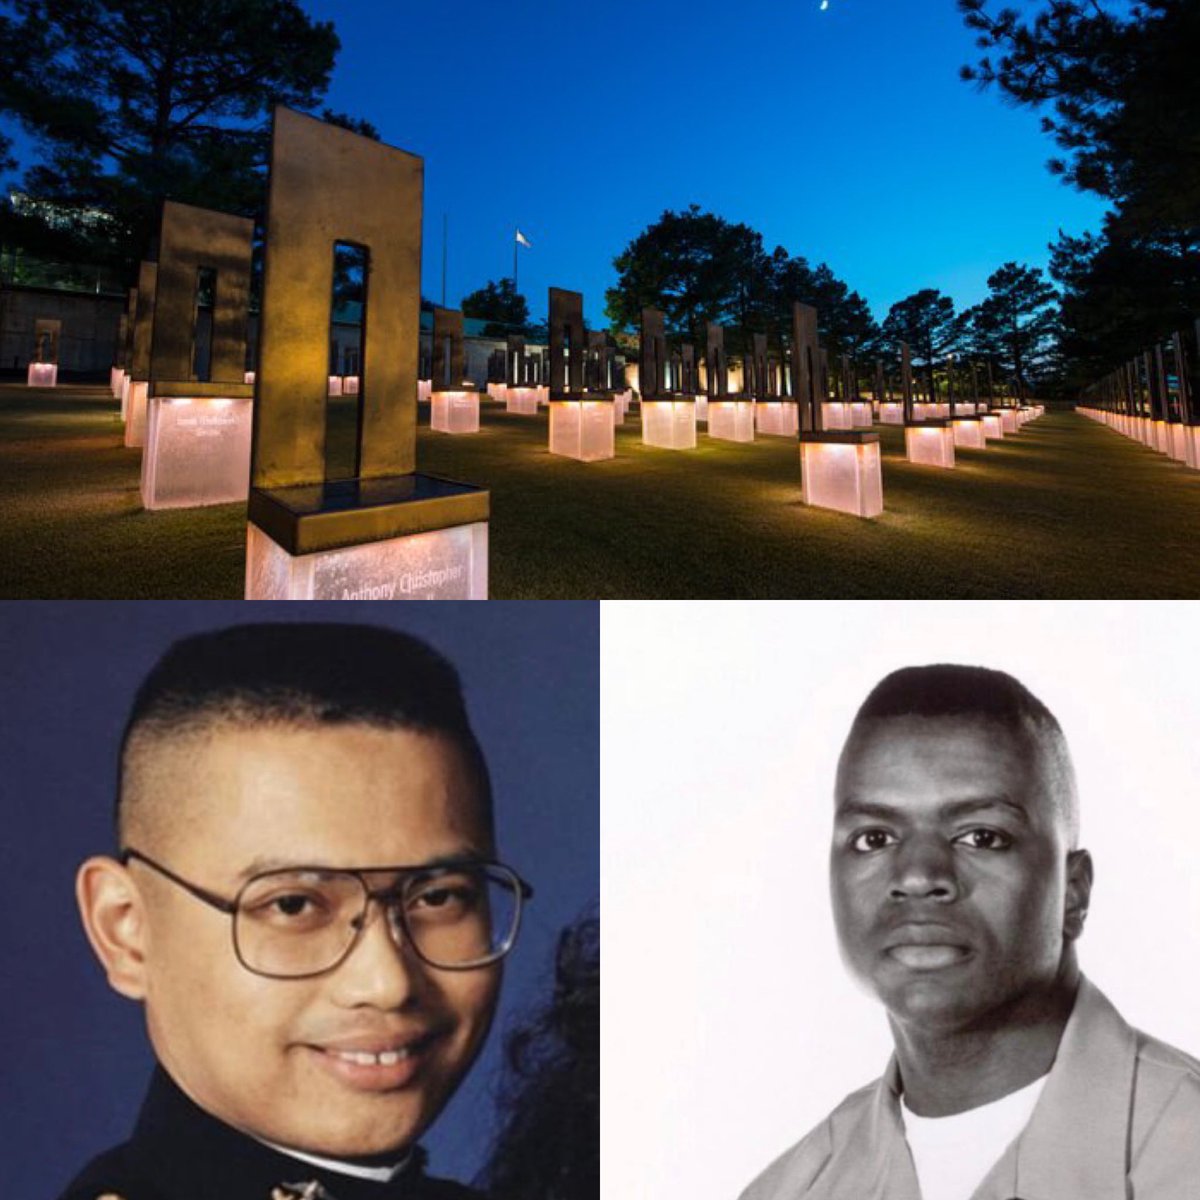 Today we honor those heroes lost during the bombing of the Alfred P. Murrah Federal Building in Oklahoma City on April 19, 1995. We Will Always Remember. #ServiceToNation #Honor #OKC #WeRemember